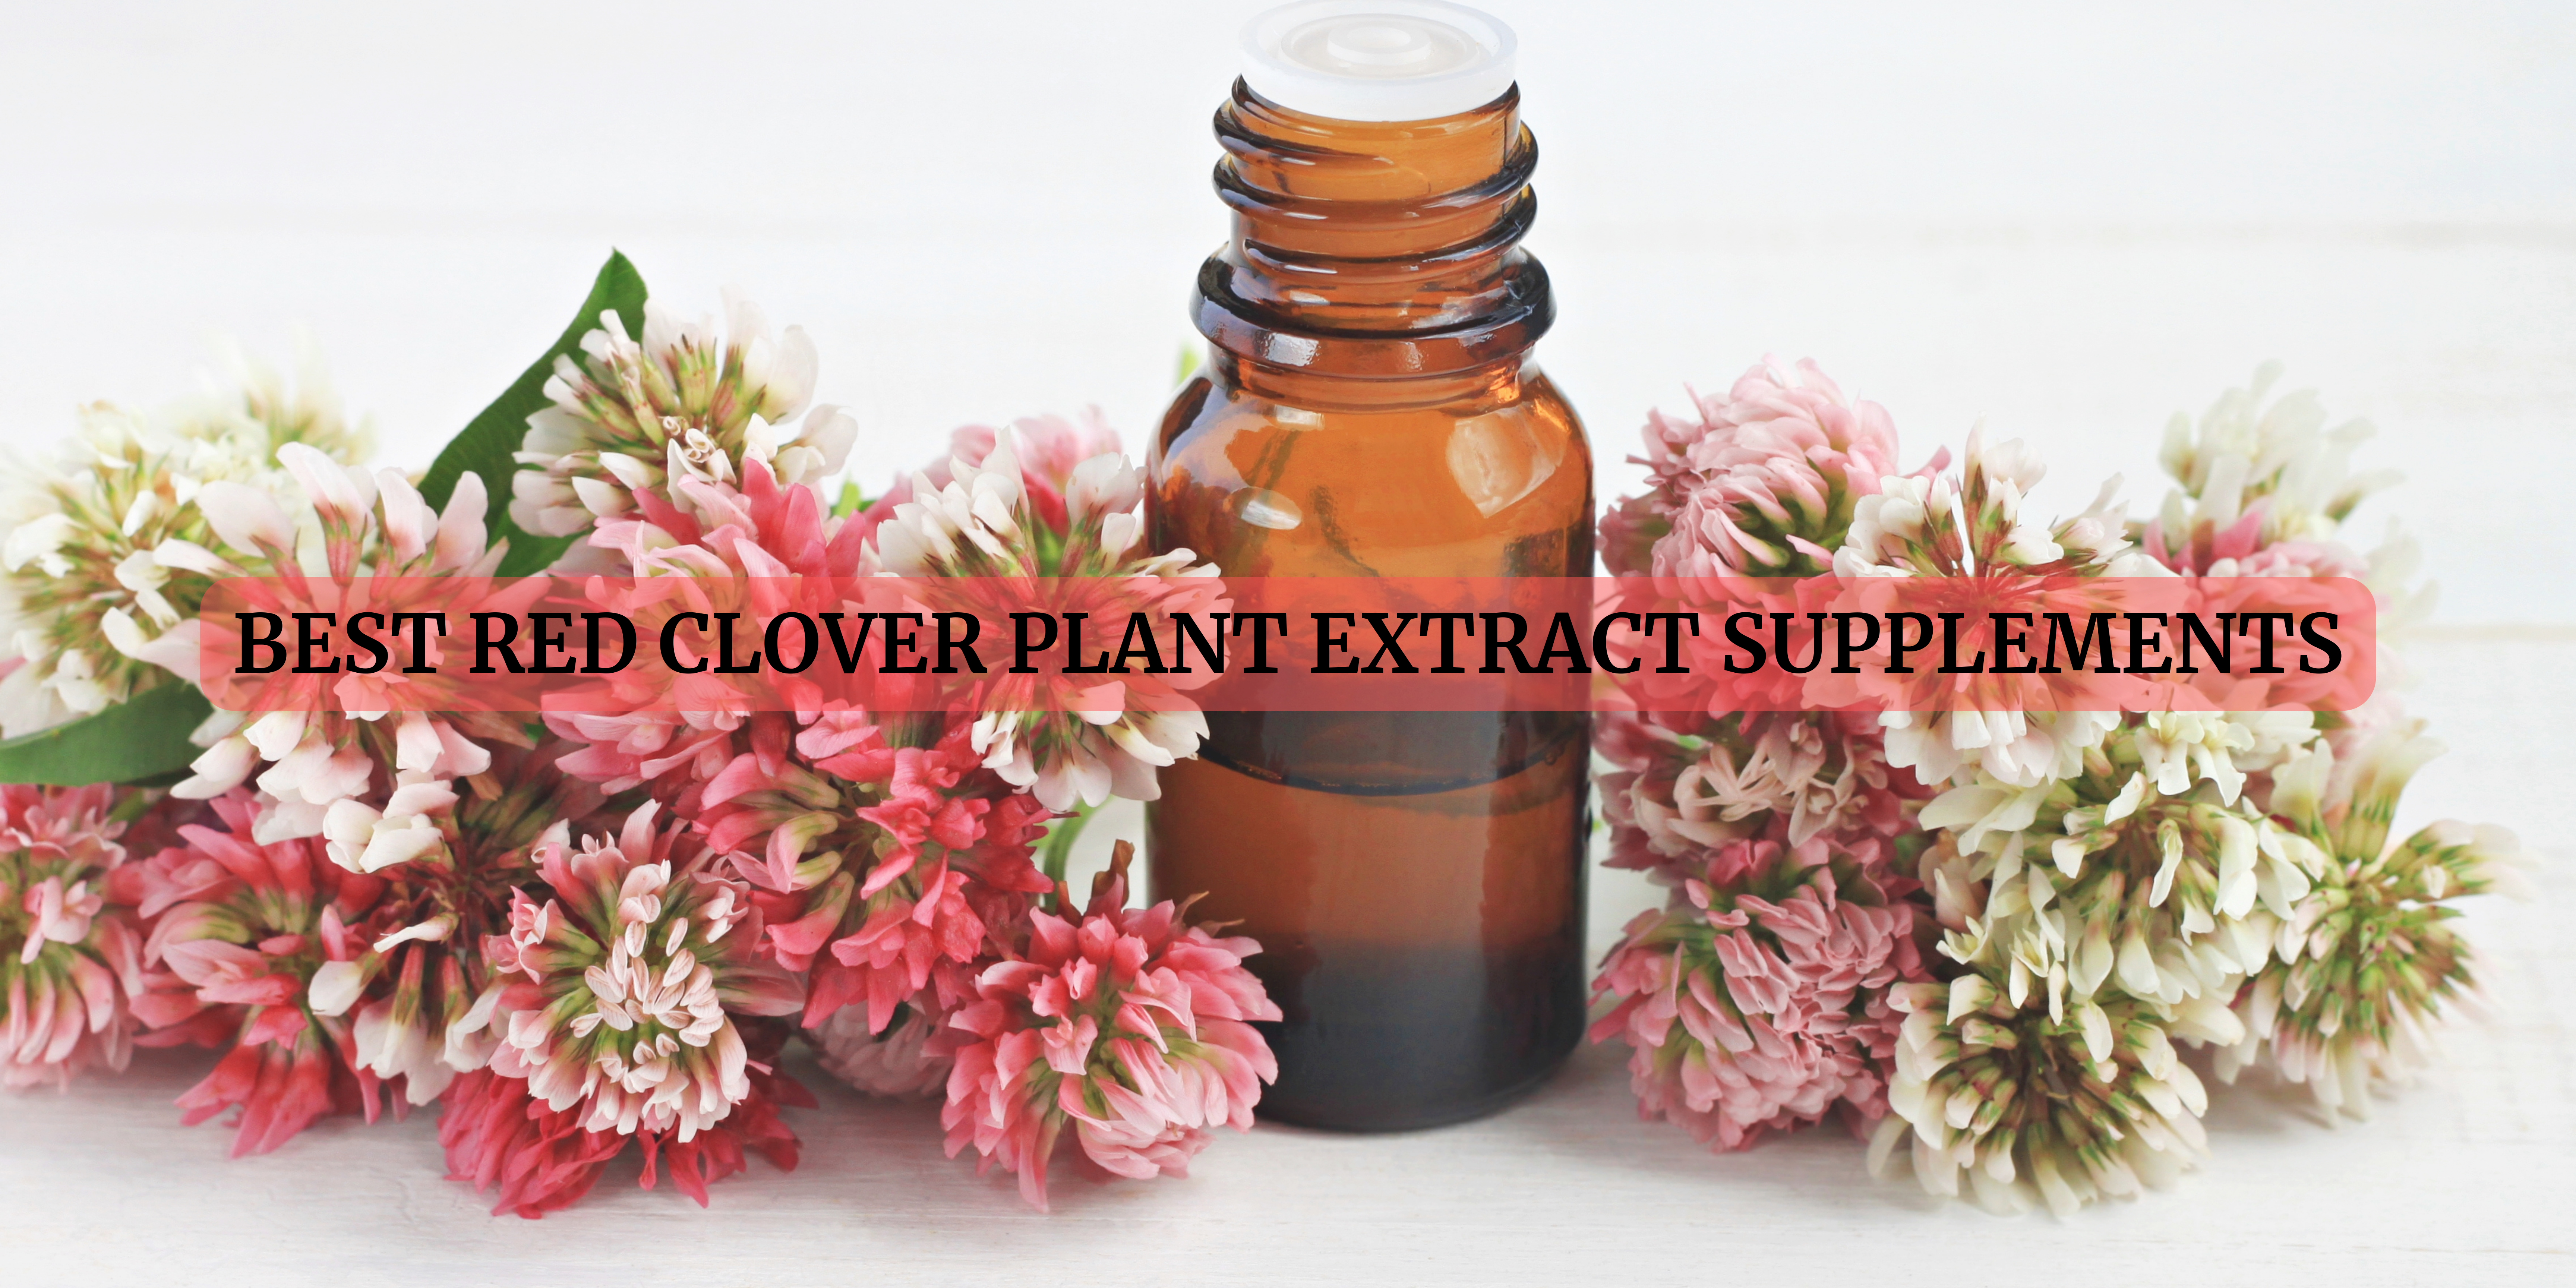 red clover extract supplements in Netherlands